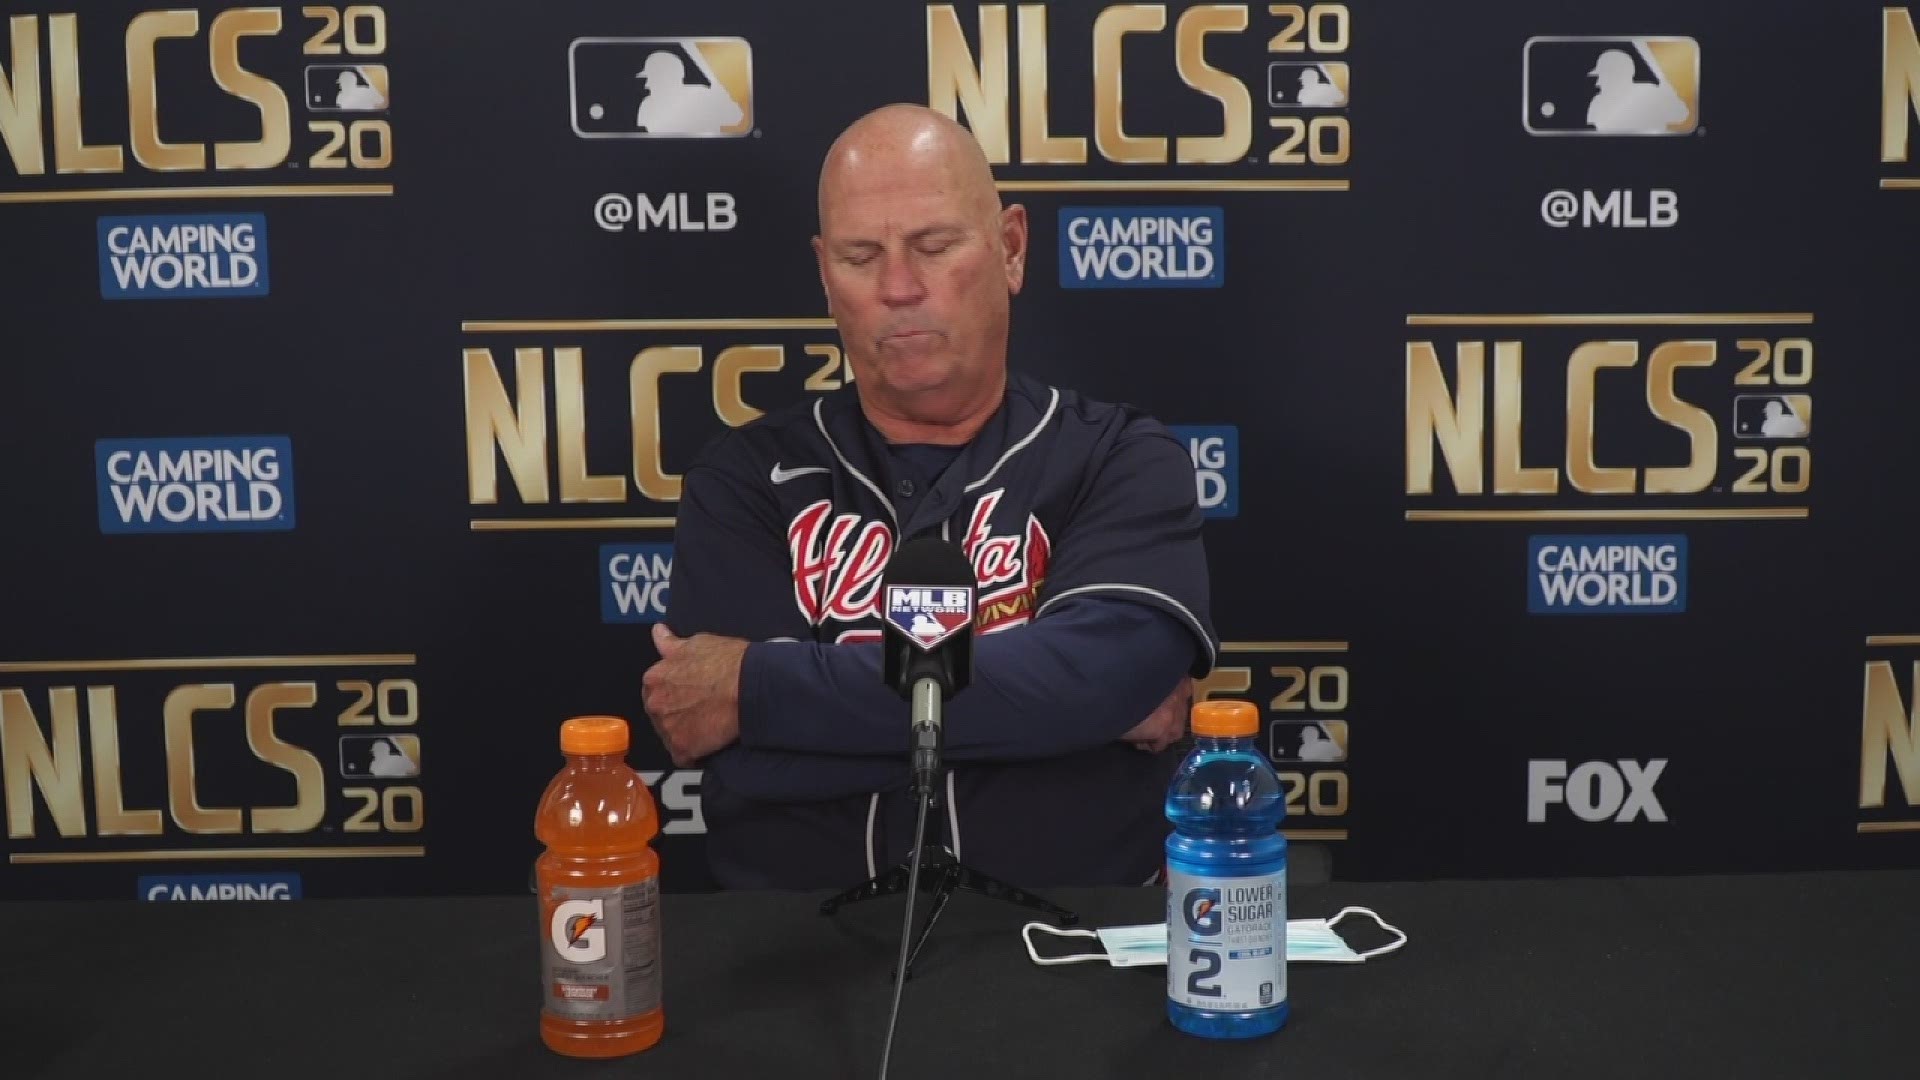 Brian Snitker gives his thoughts on game 2 of the NLCS. The Braves won 8-7, but nearly collapsed as the Dodgers had a late rally.